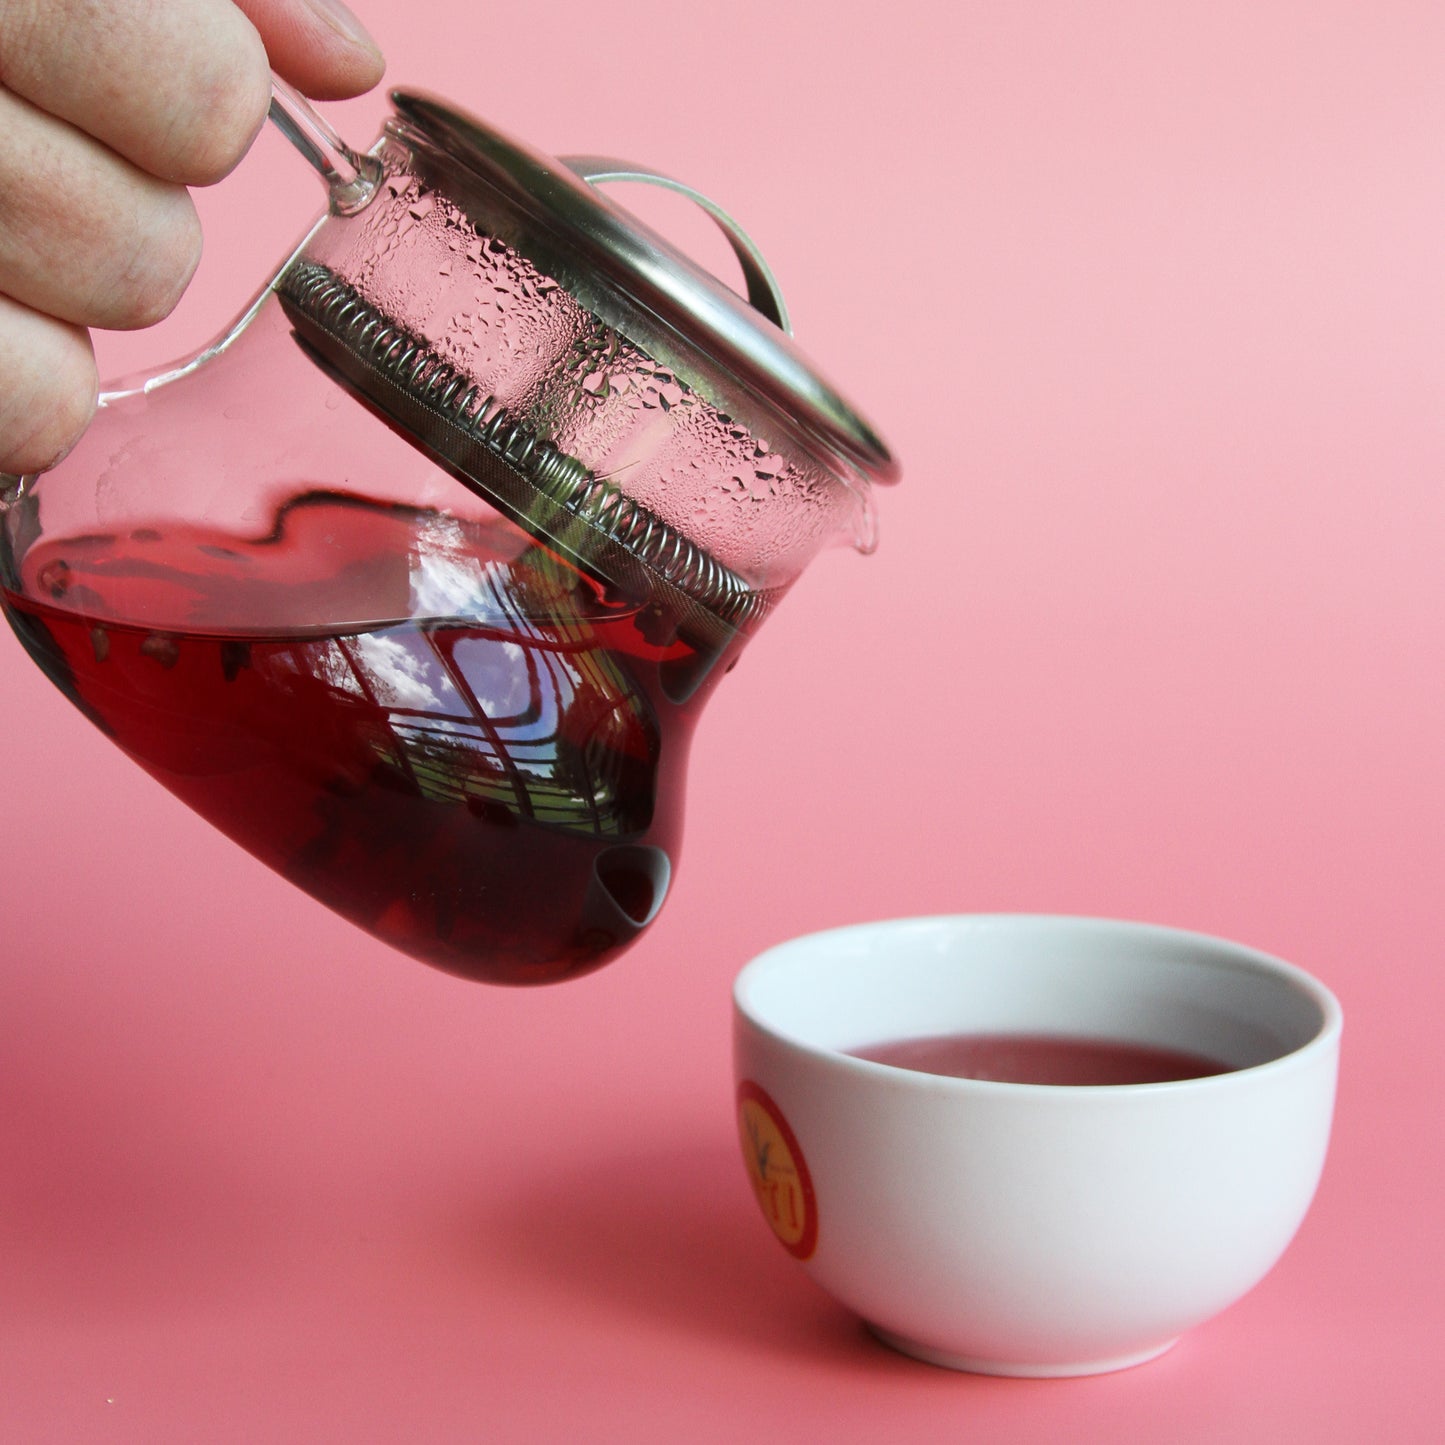 Hand pouring Royal Fruits infusion from glass tea pot into white tea bowl